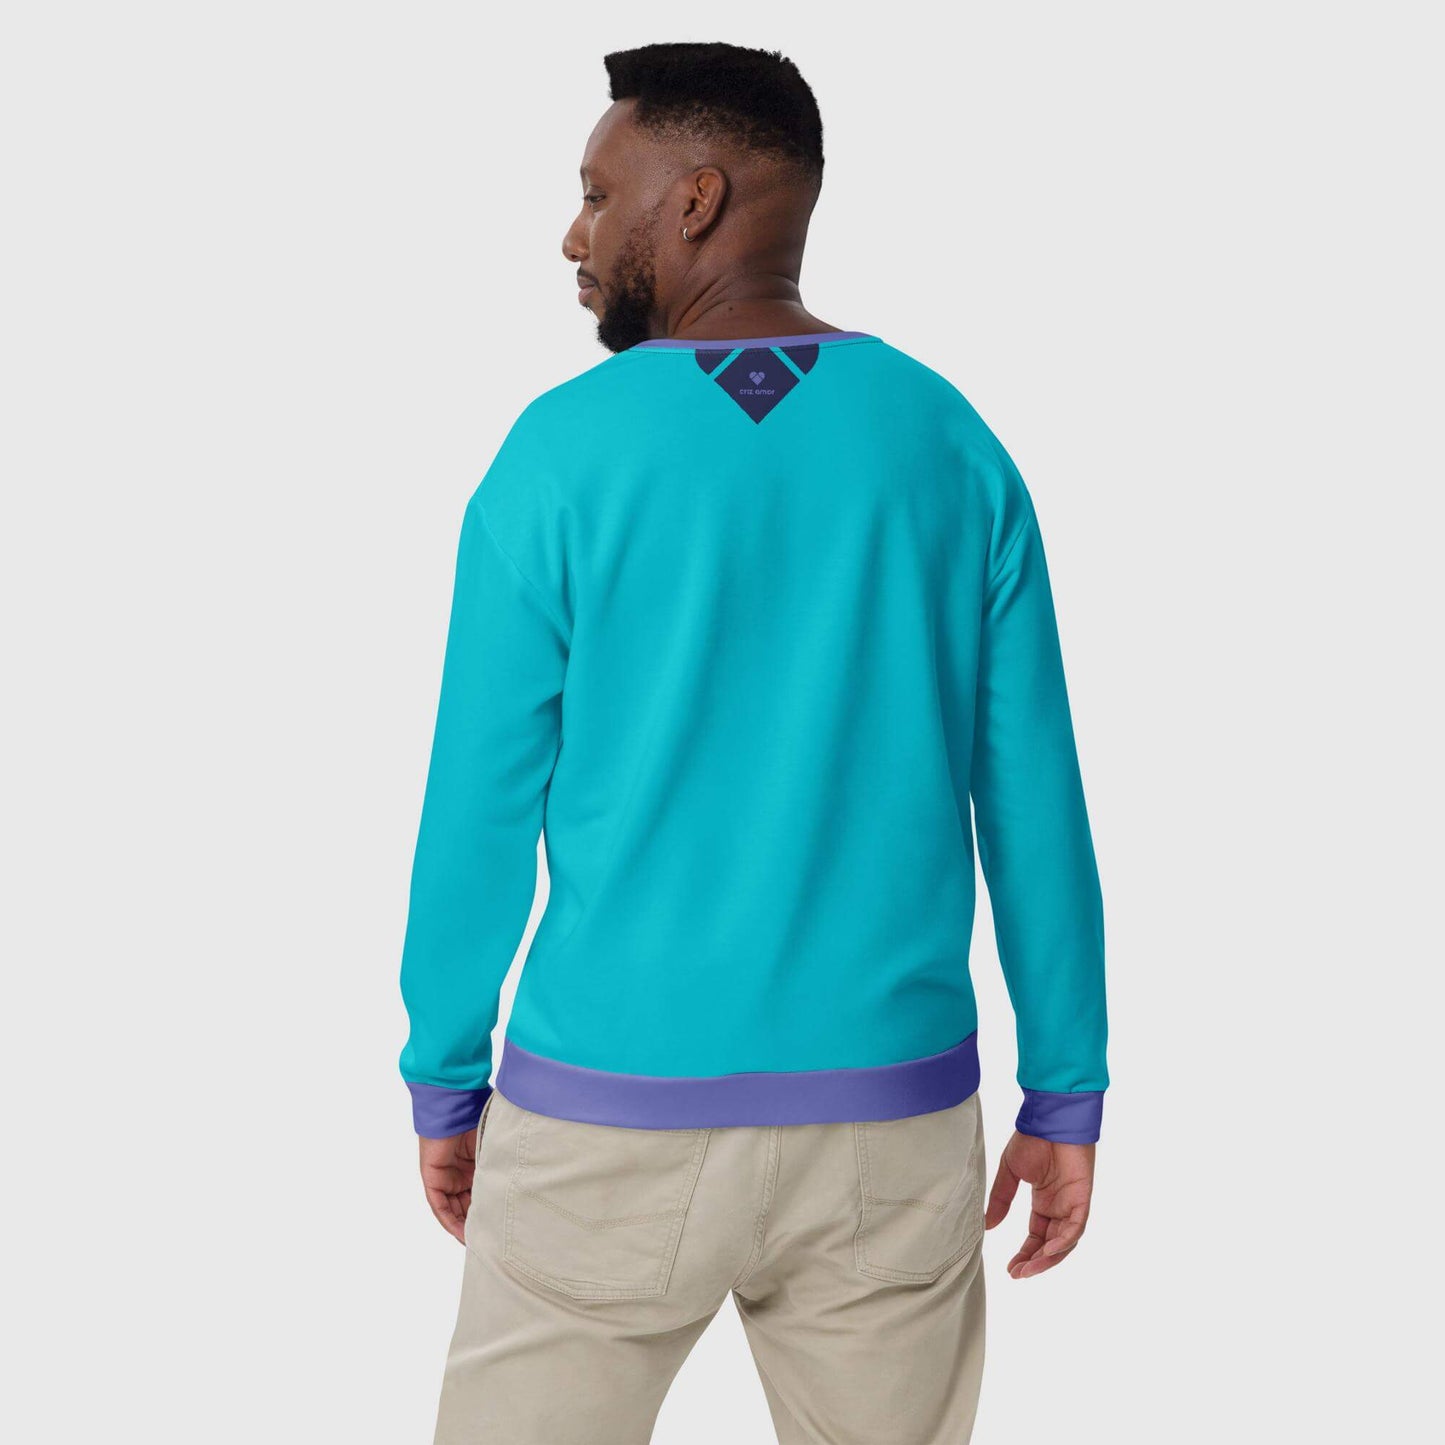 Chic and Casual Turquoise Sweatshirt for Any Occasion | CRiZ AMOR Amor Dual